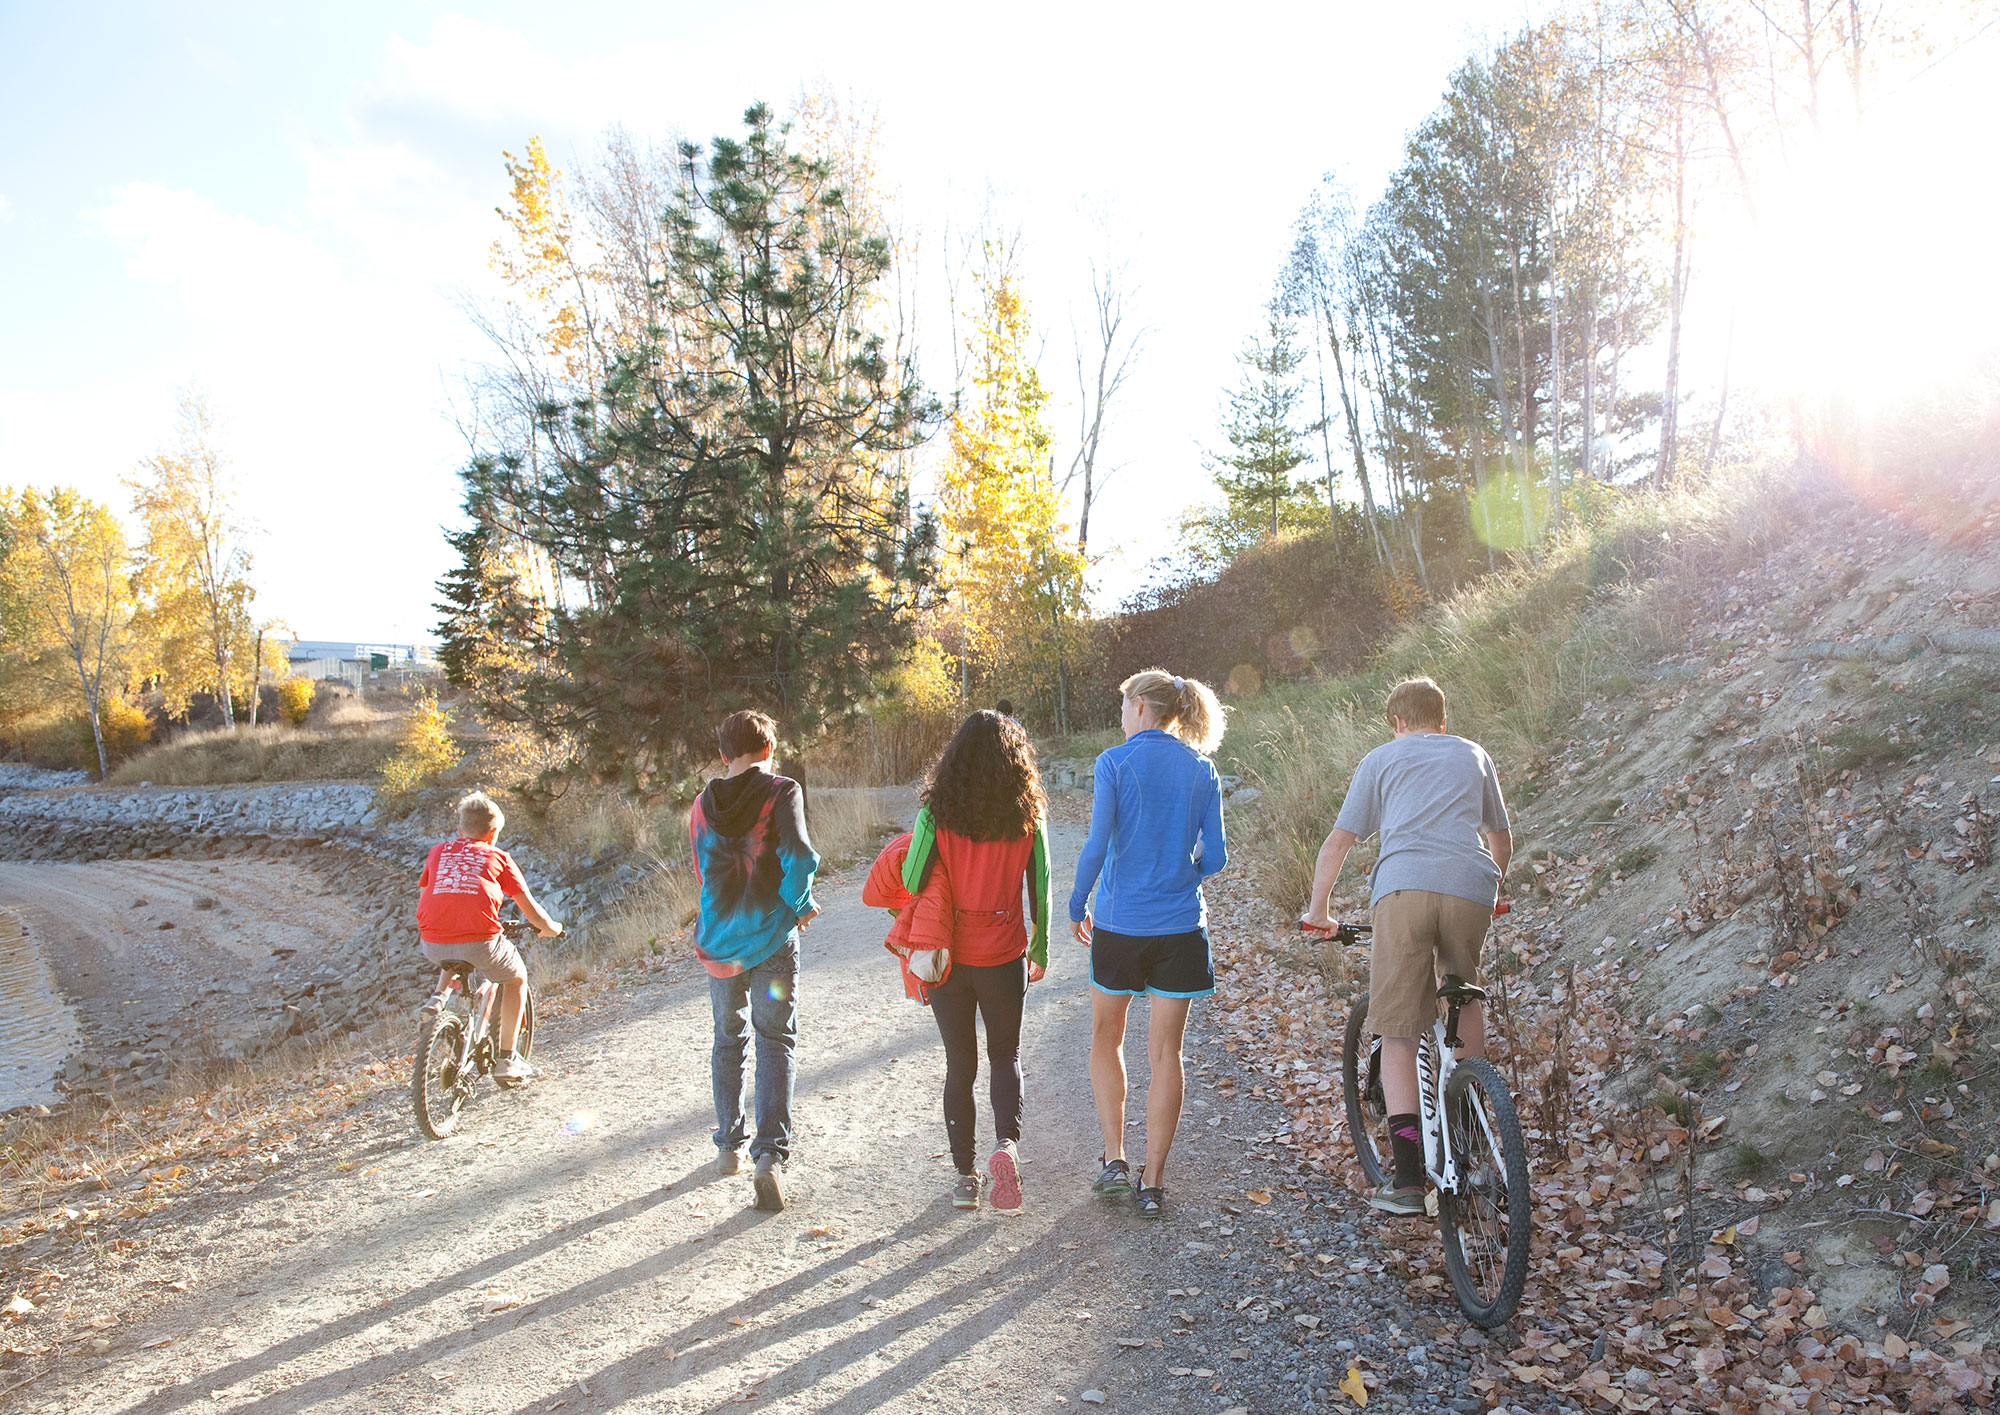 A group of kids riding bikes on a dirt path.